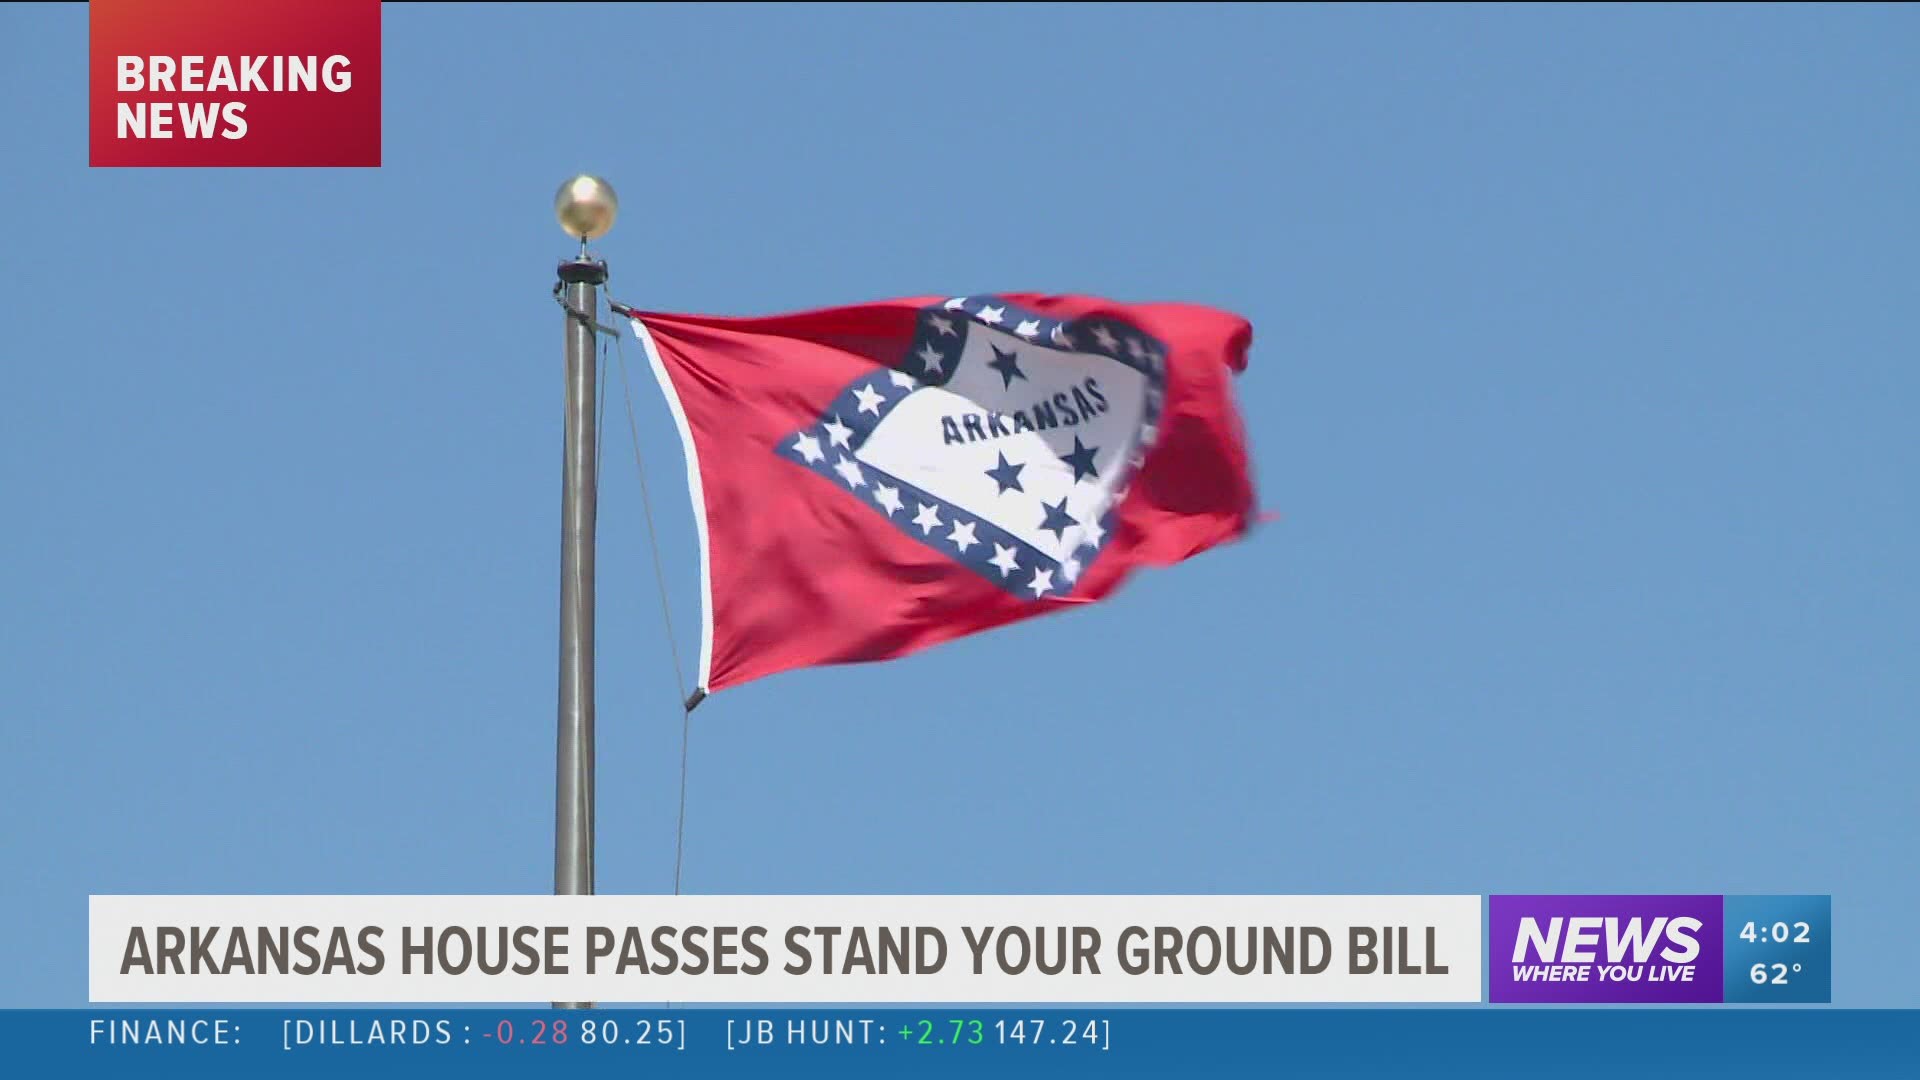 Arkansas House passes Stand Your Ground Bill